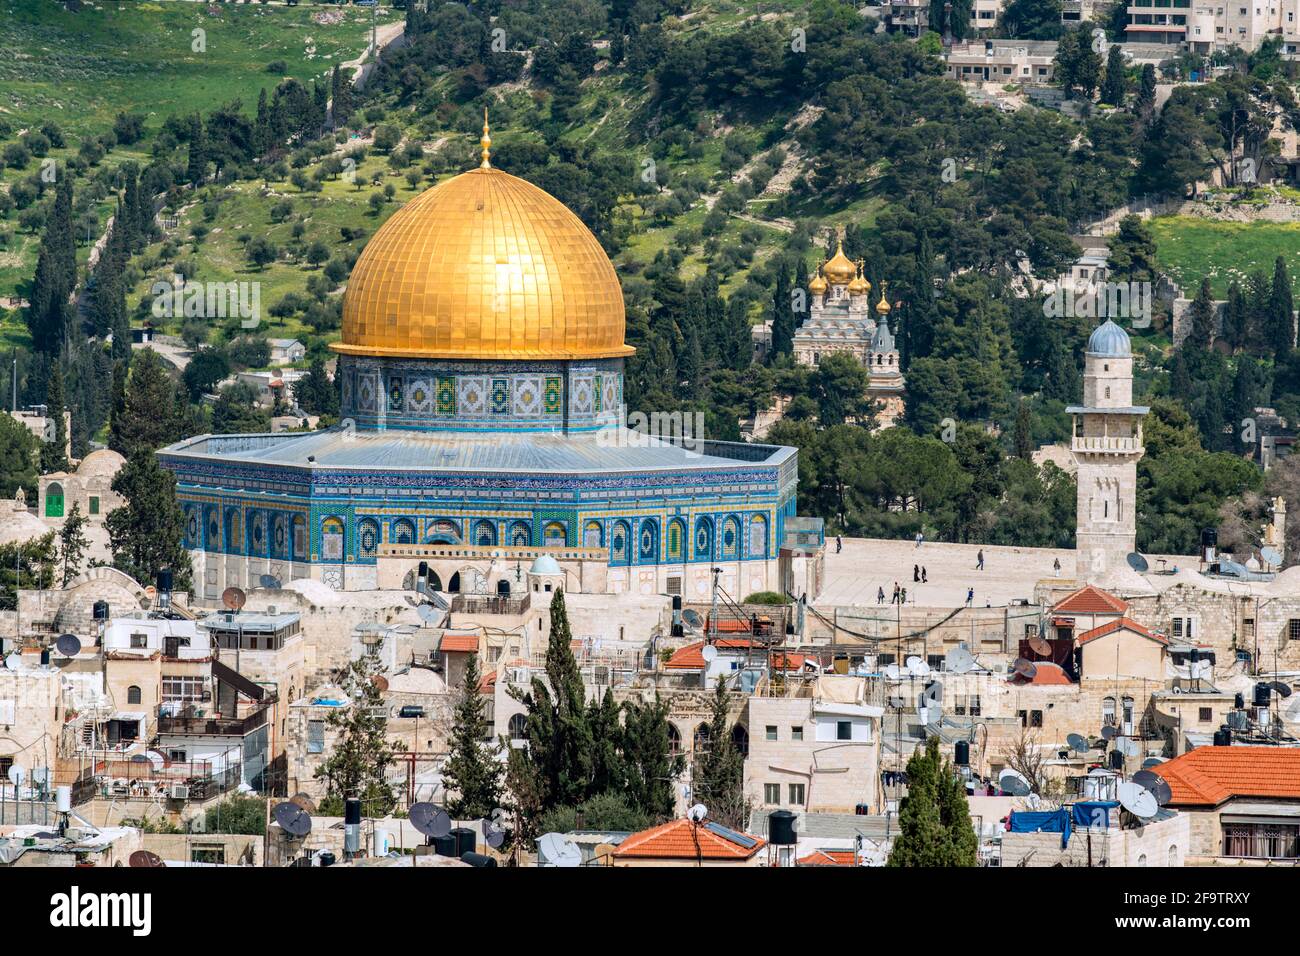 Dome of the Rock with it’s golden dome on Jerusalem’s Temple Mount and Mount of Olives with Church of St. Mary Magdalene as seen from Tower of David Stock Photo